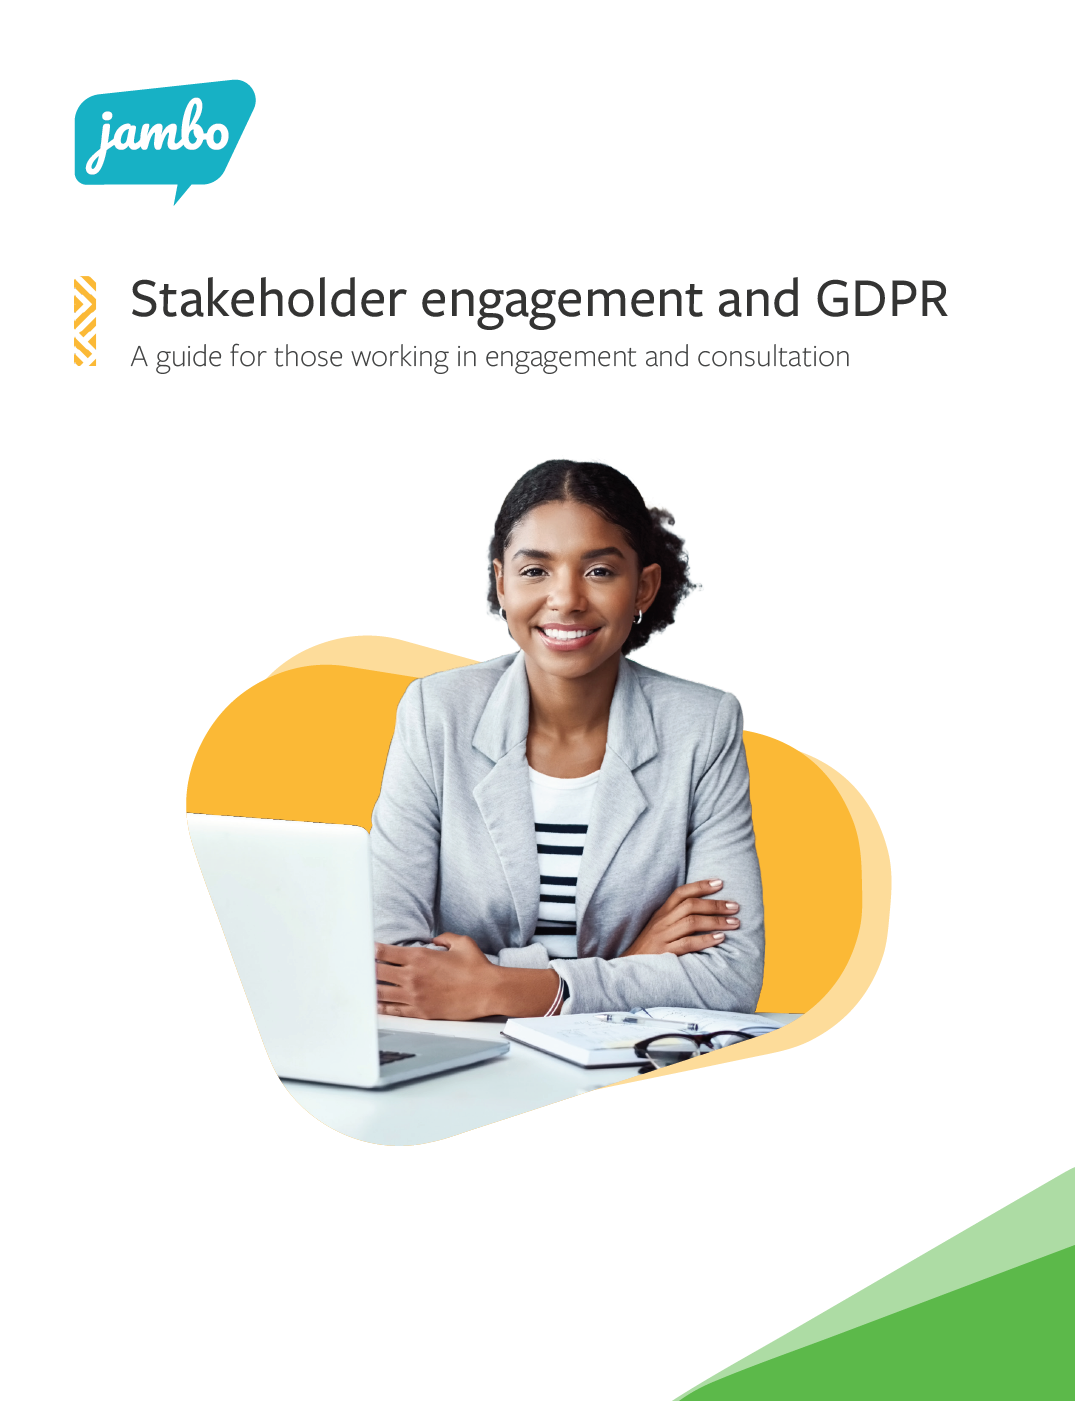 Stakeholder engagement and GDPR